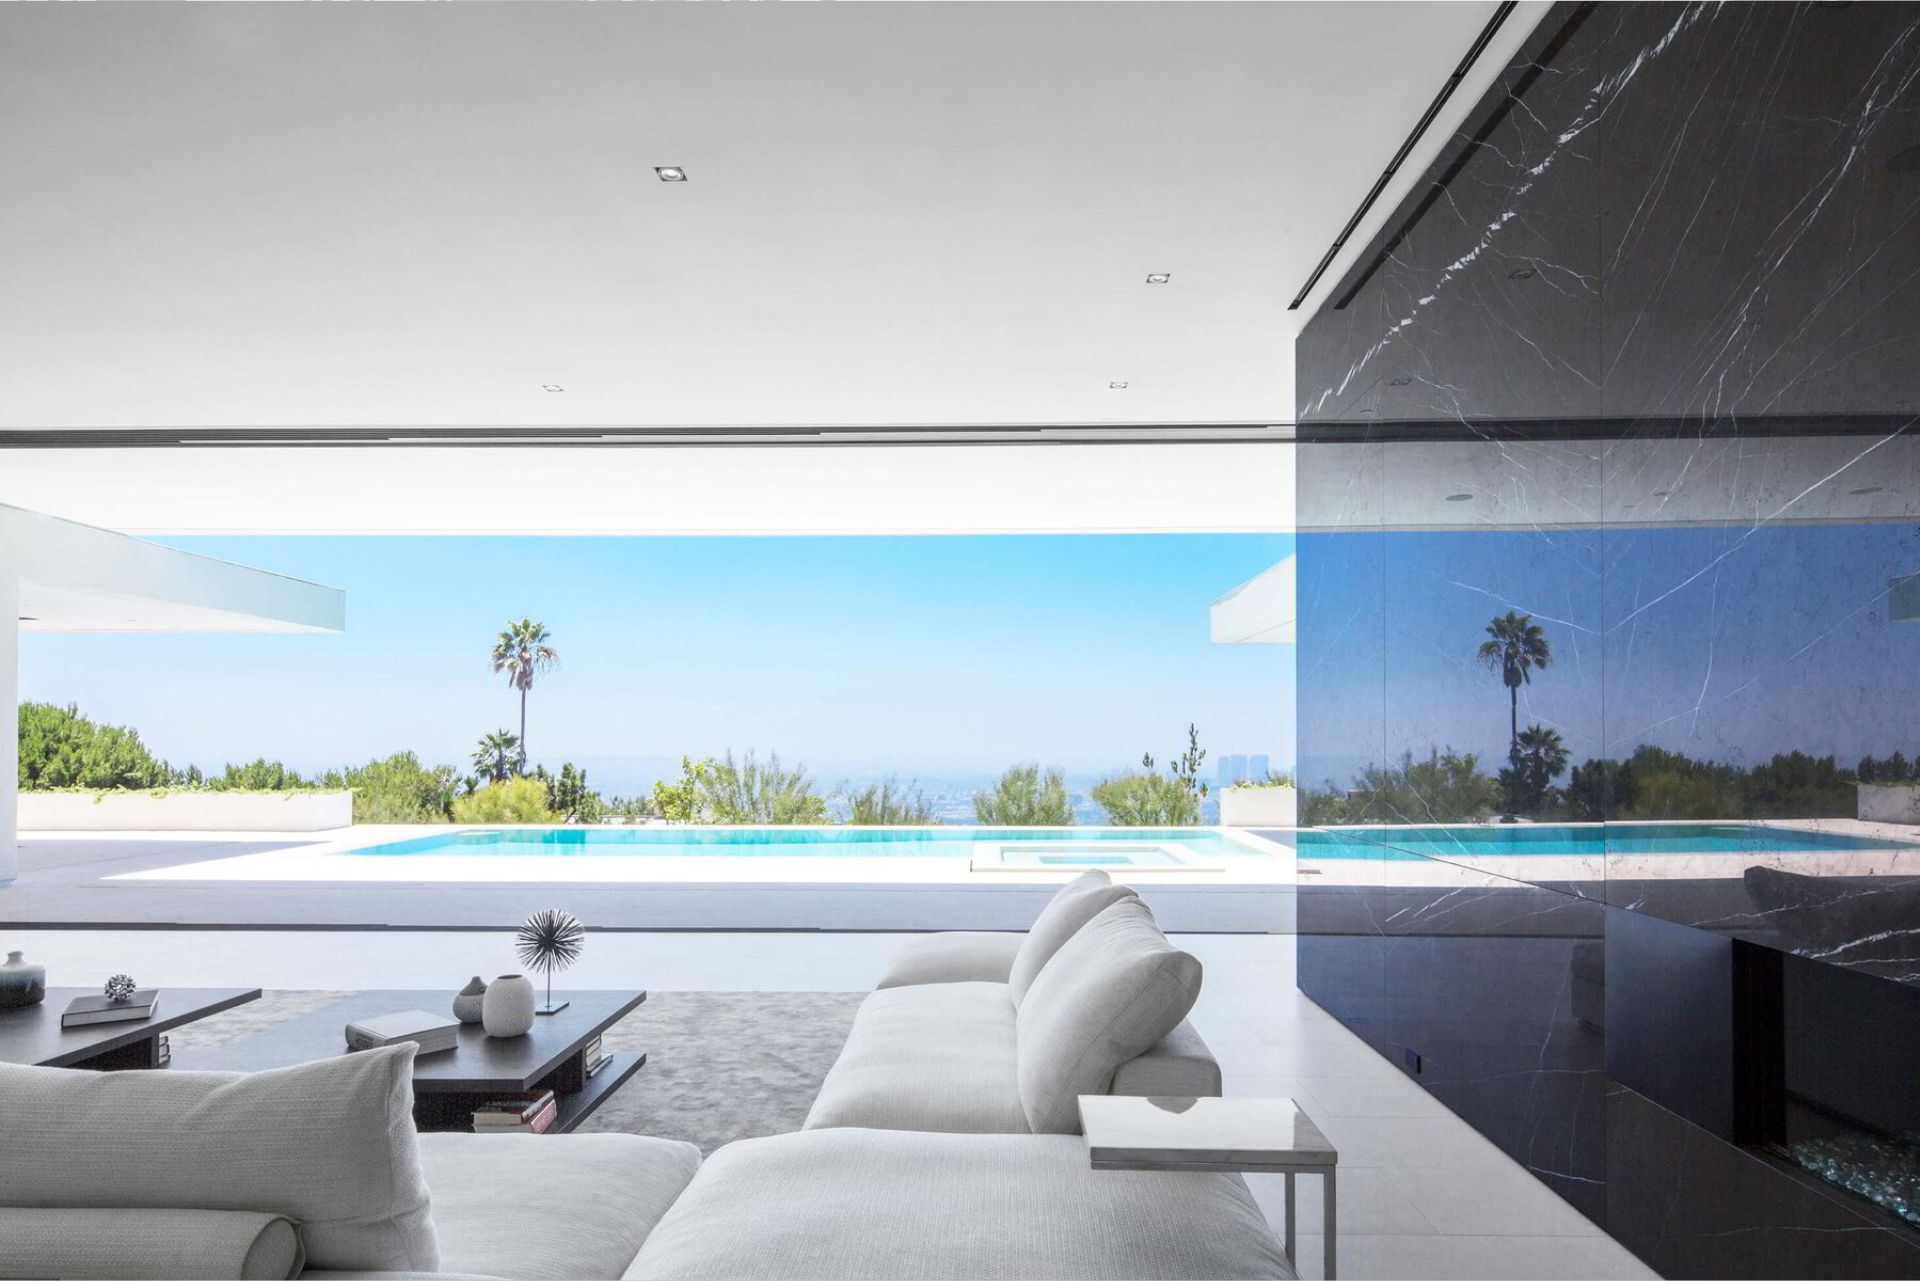 A California dream of design between the sky and the ocean